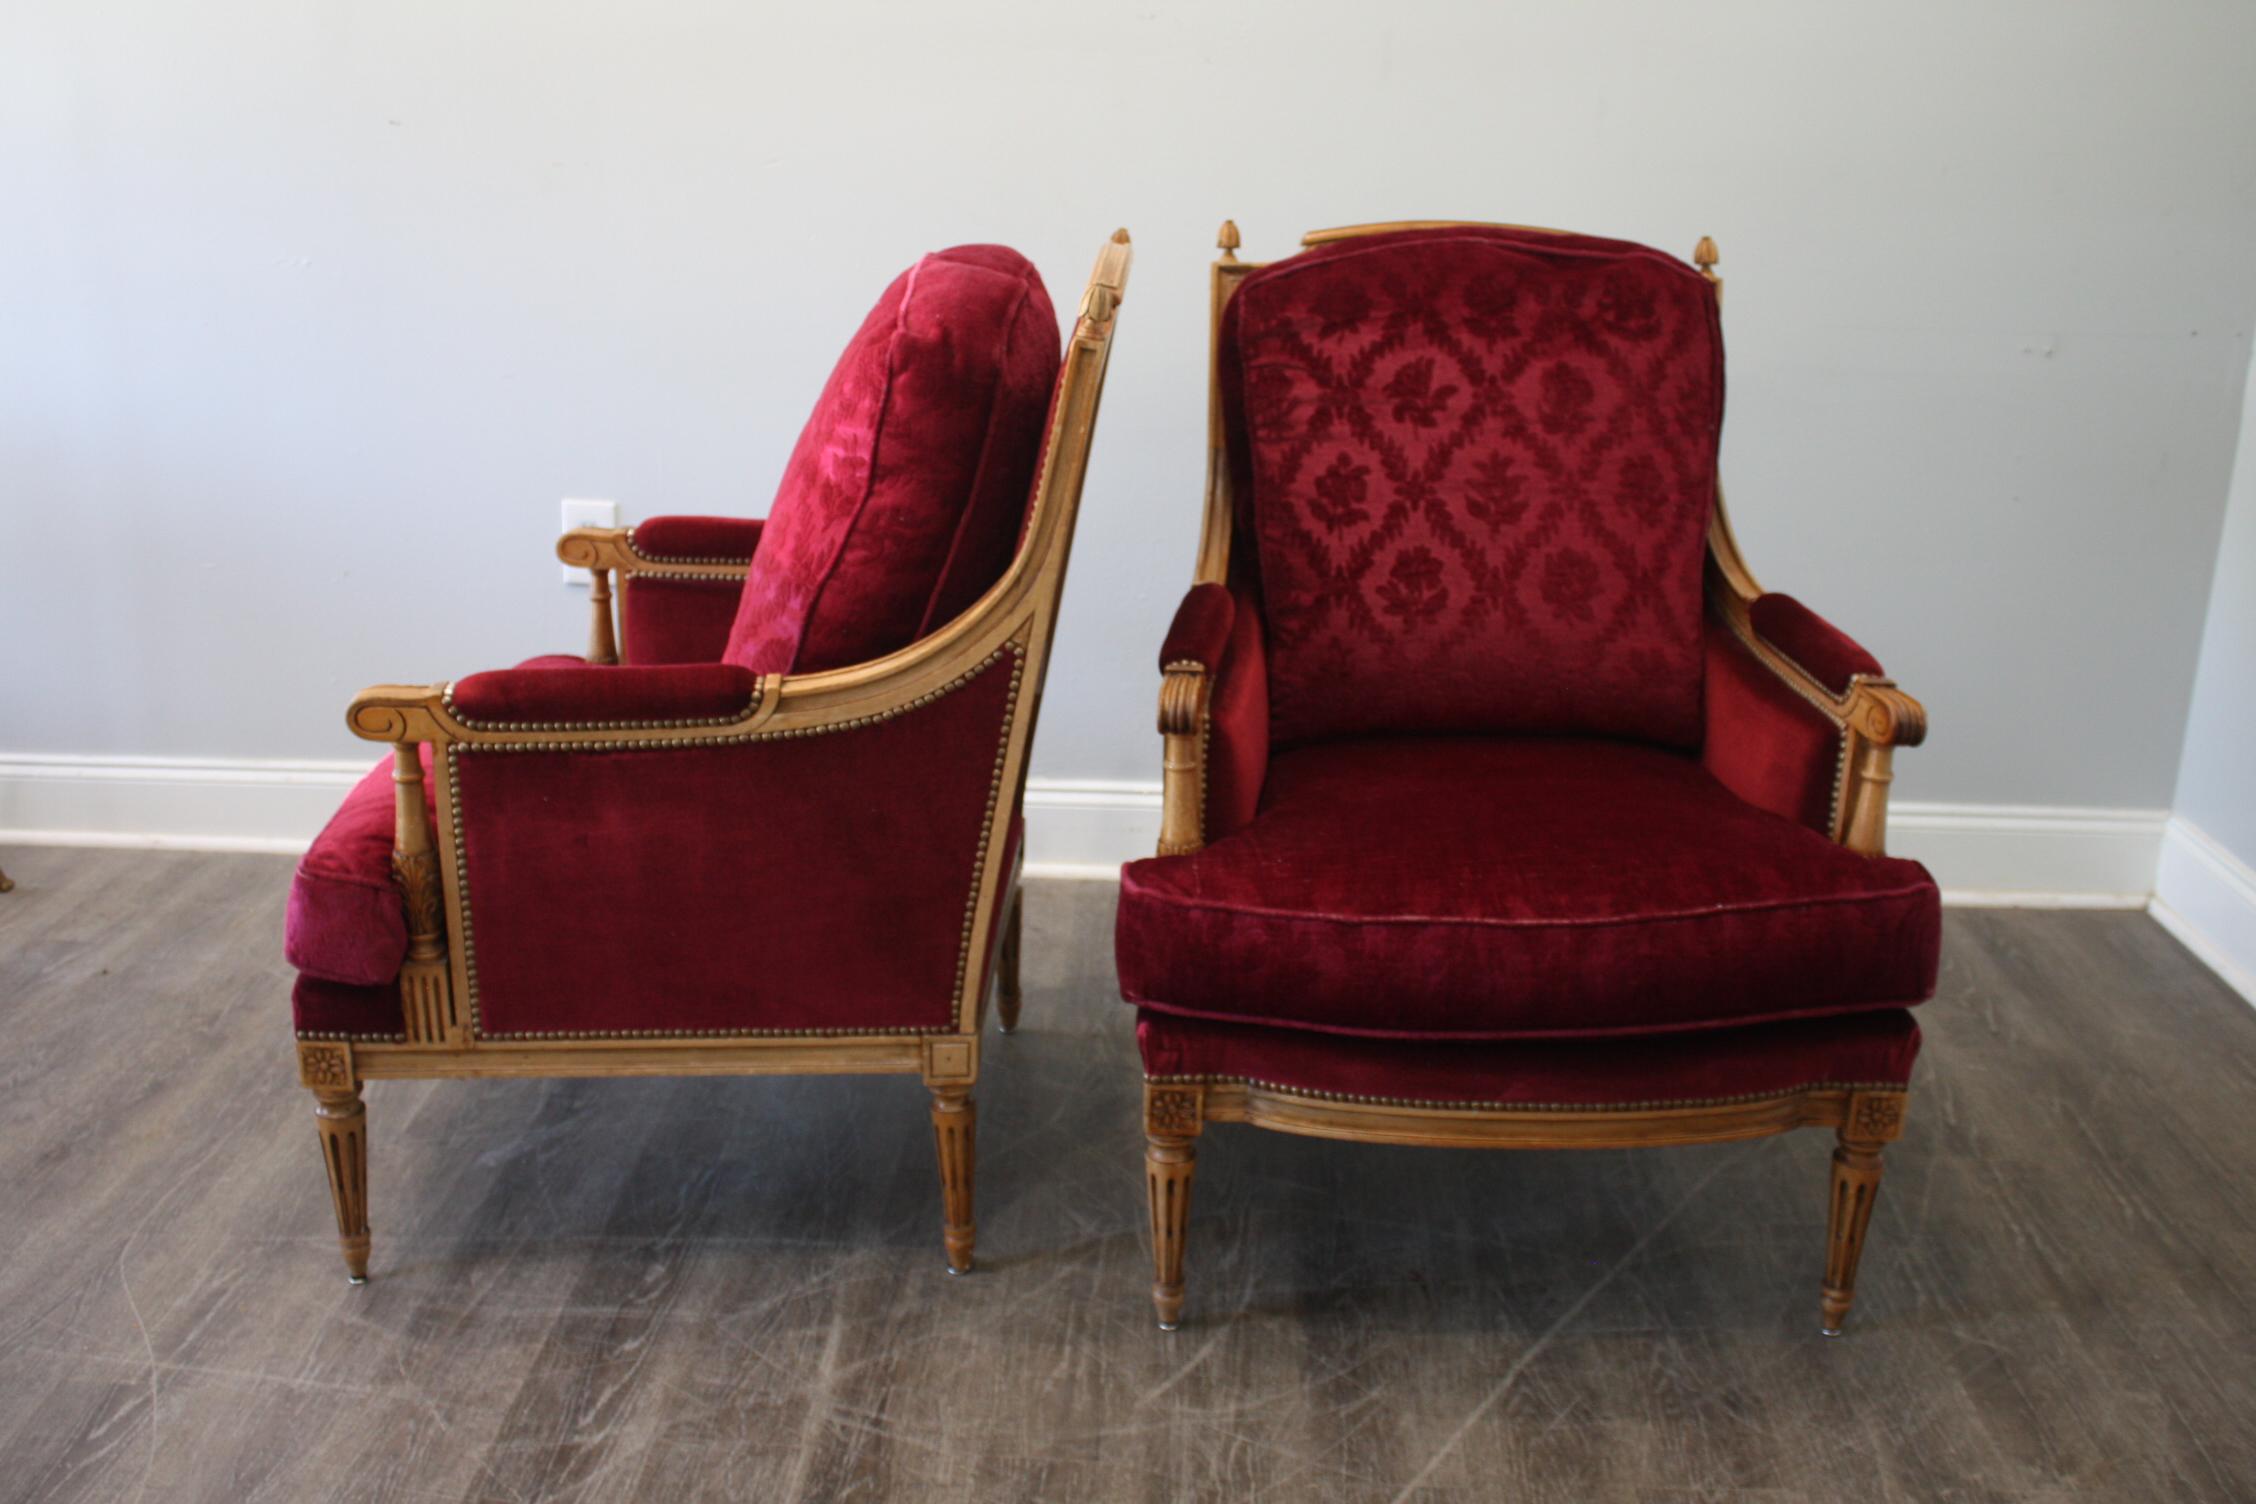 20th Century French Louis XVI Style Bergere Chairs For Sale